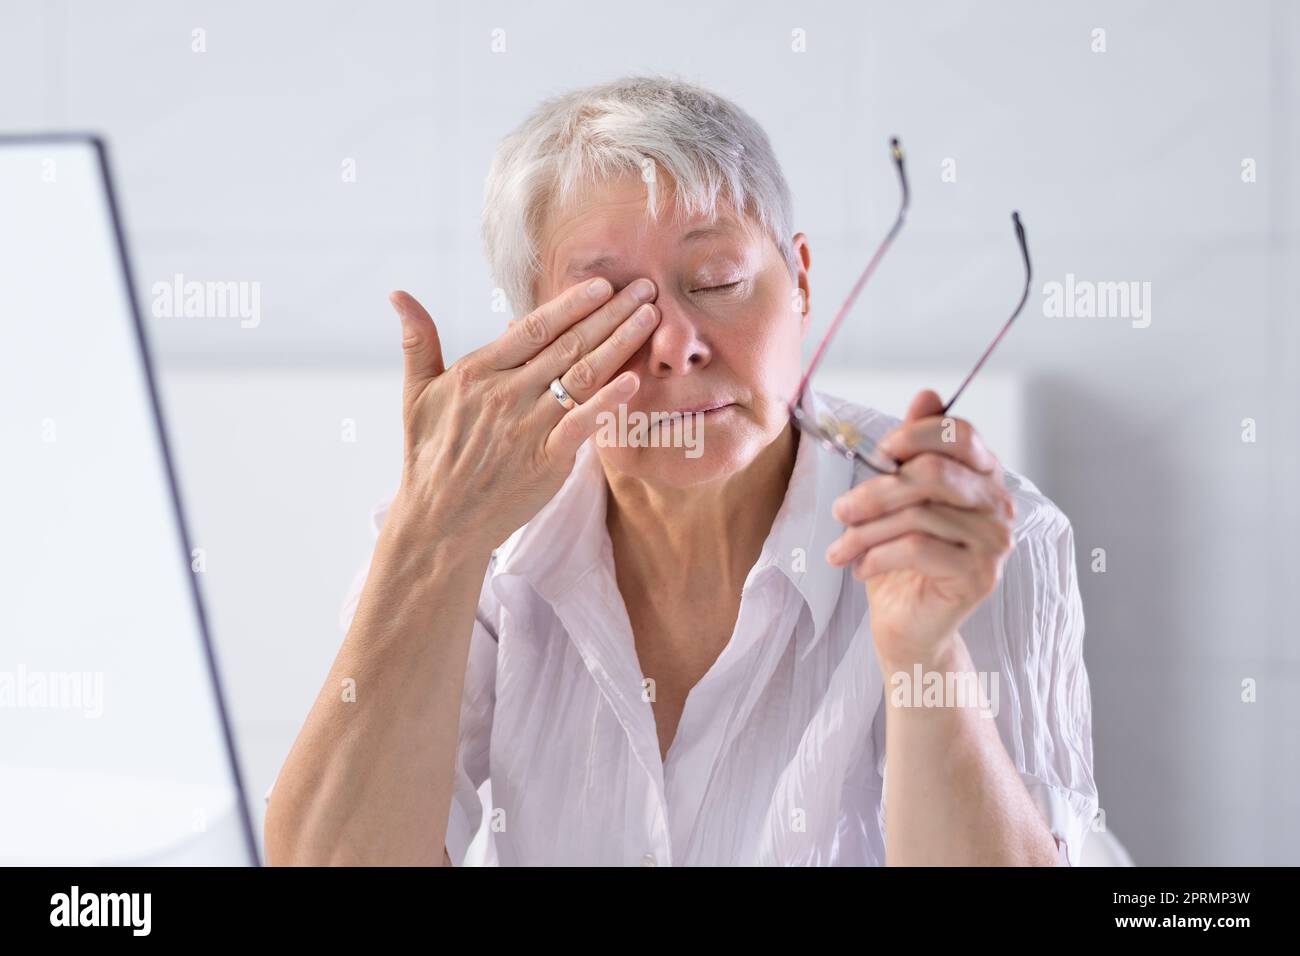 Eye Pain And Inflammation. Woman With Retina Fatigue Stock Photo